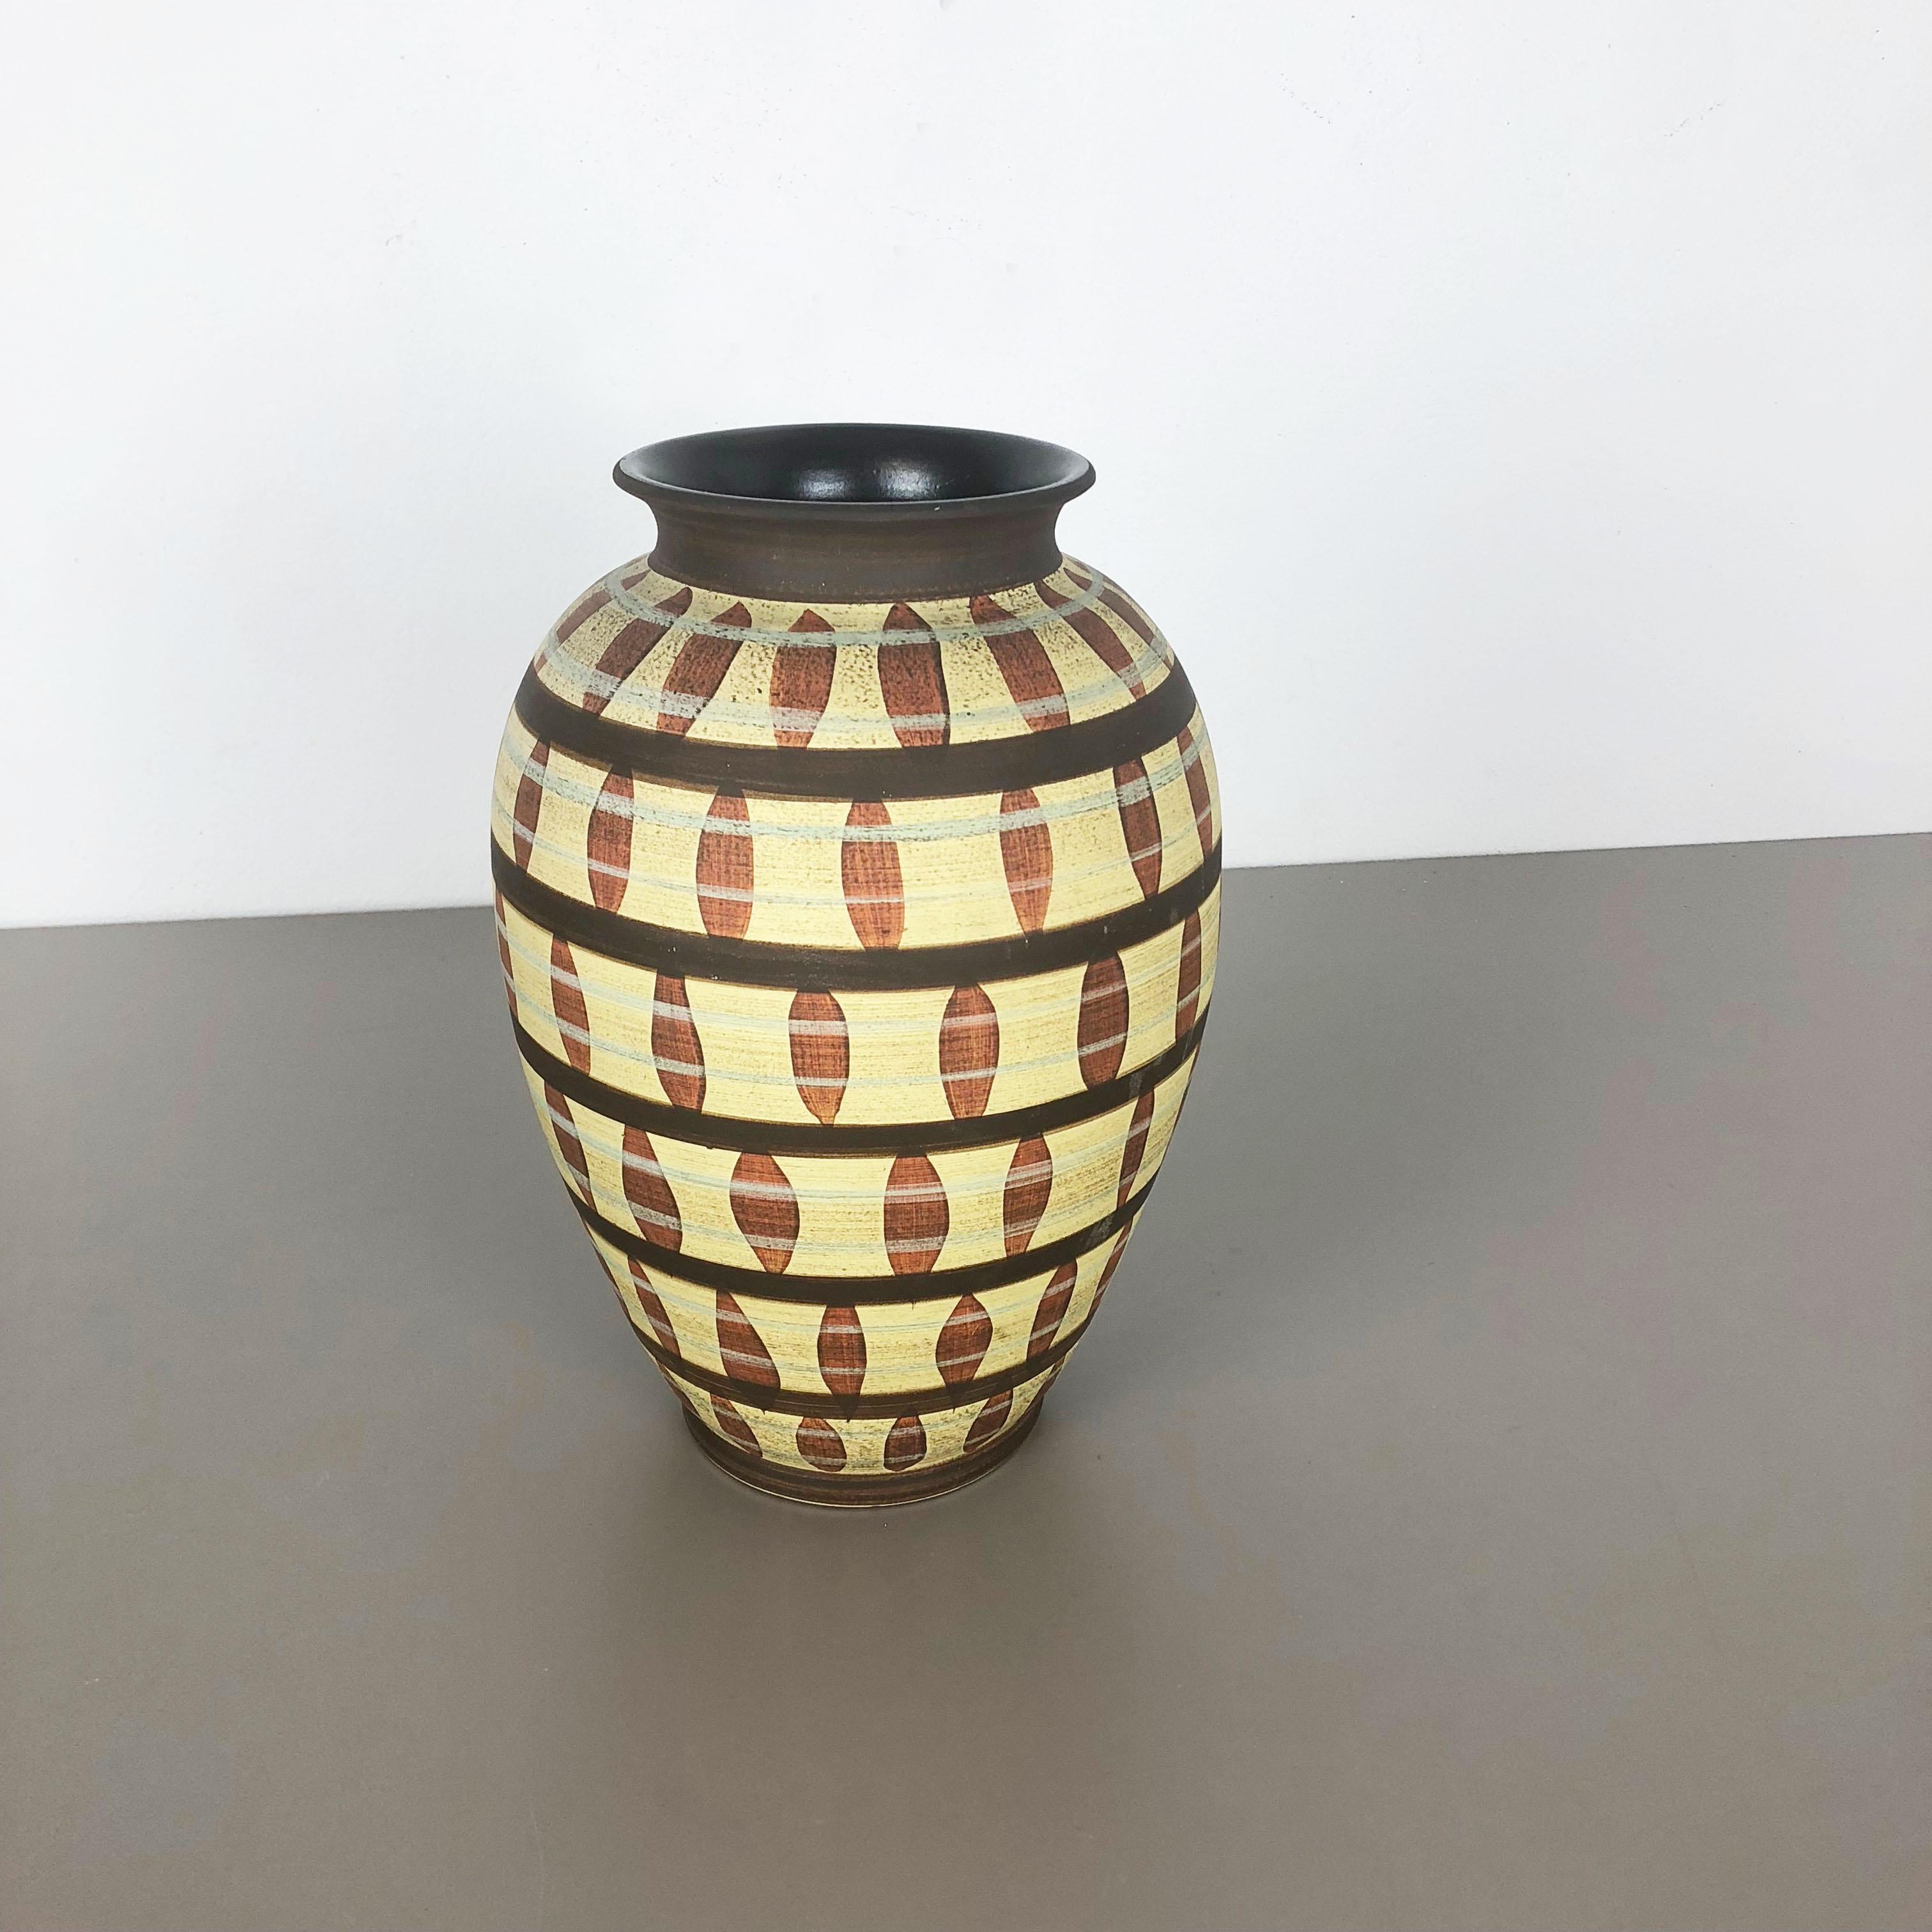 Article:

Pottery ceramic vase


Producer:

Simon Peter Gerz, Germany


Decade:

1950s



Description:

Original vintage 1950s pottery stoneware ceramic vase in Germany. High quality German production with a nice abstract